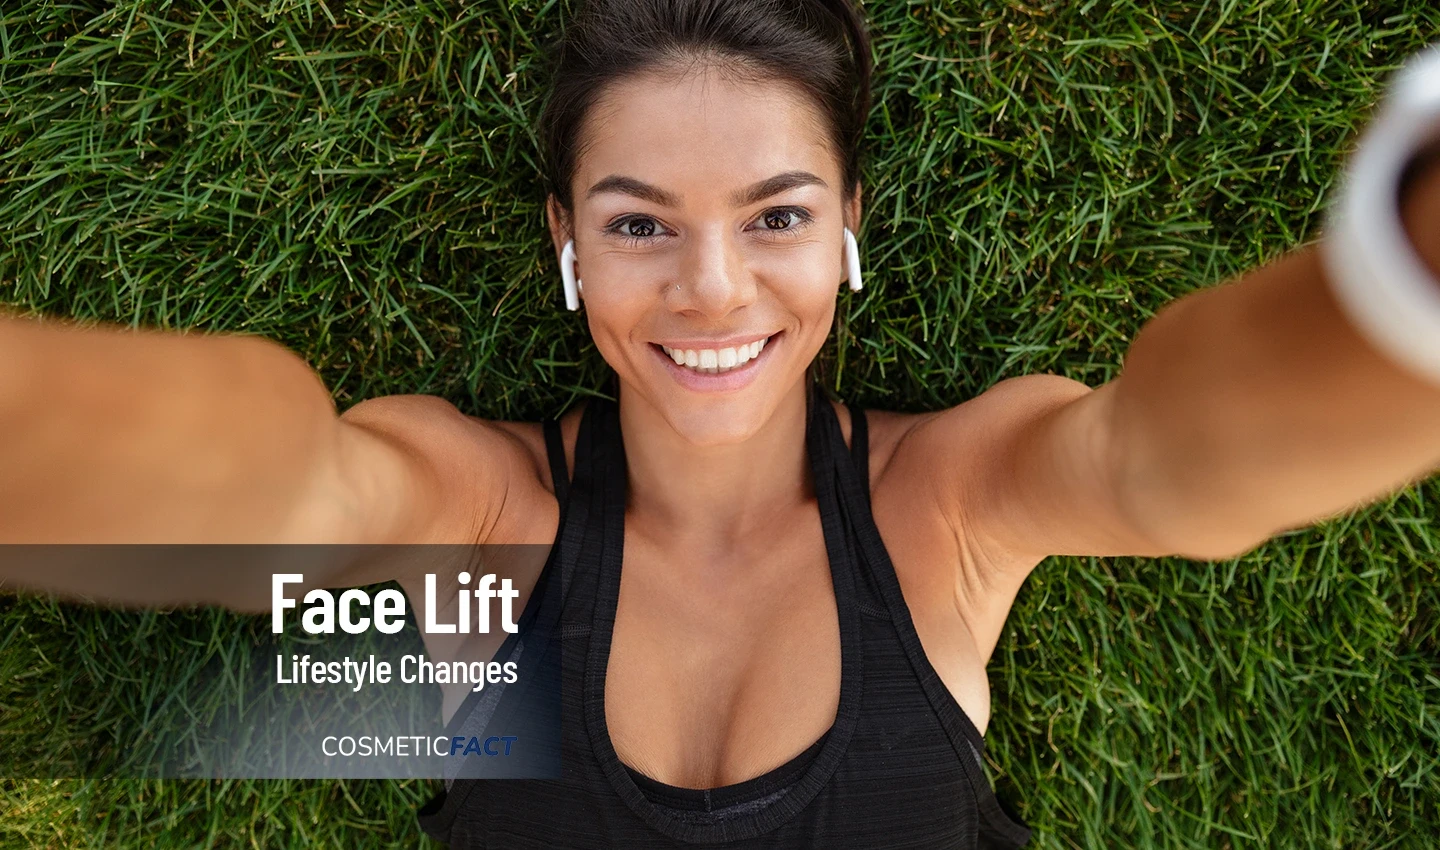 An athletic woman lying on the grass and smiling, symbolizing the positive outcome of lifestyle changes made in preparation for facelift surgery.An athletic woman lying on the grass and smiling, symbolizing the positive outcome of lifestyle changes made in preparation for facelift surgery.